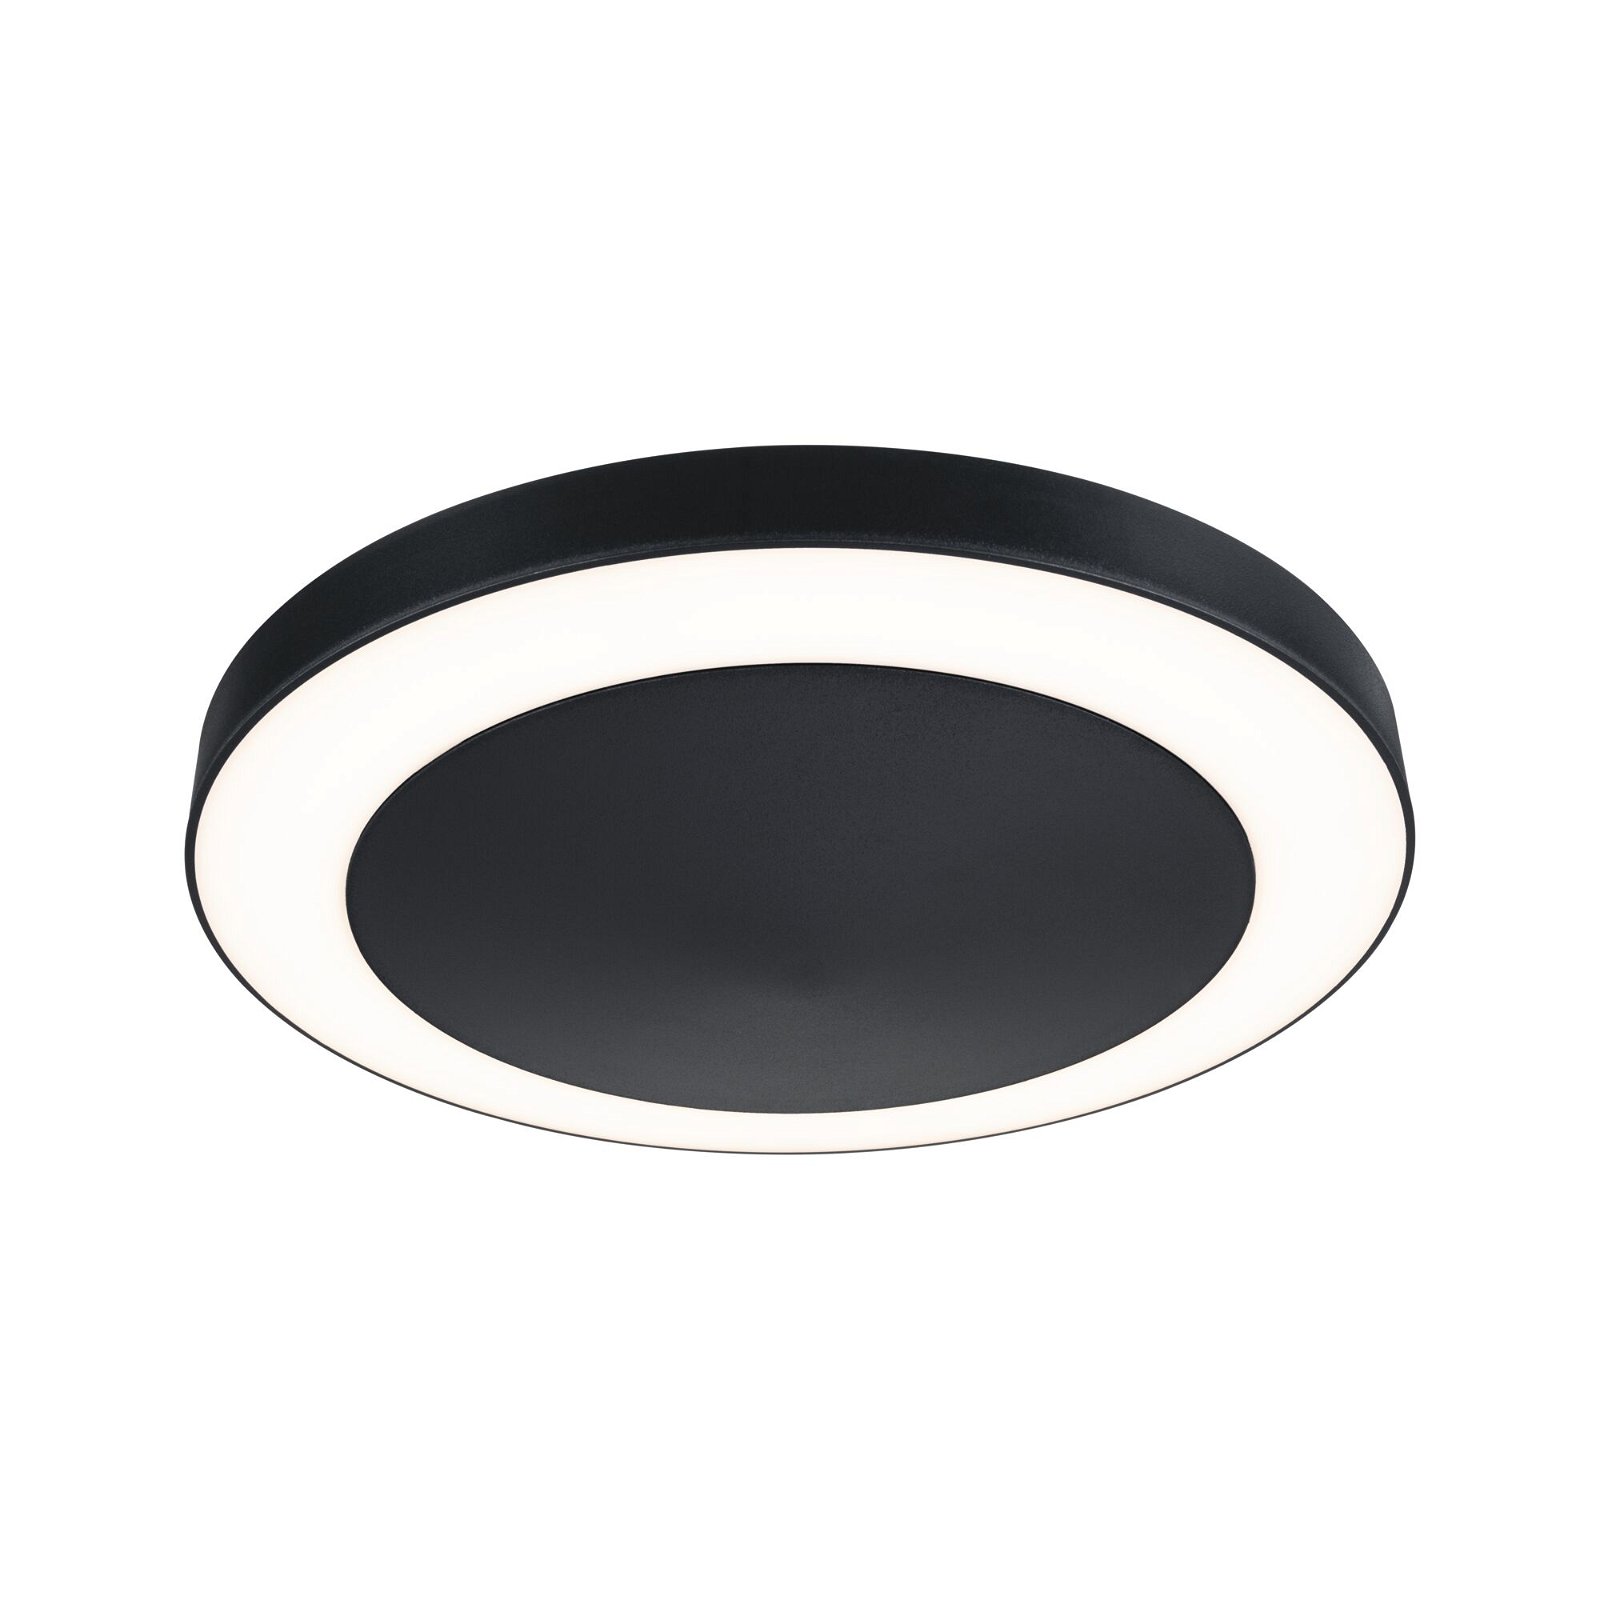 LED Ceiling luminaire Smart Home Zigbee Circula Dusk sensor insect-friendly IP44 round 320mm Tunable Warm 14W 880lm 230V Anthracite Plastic